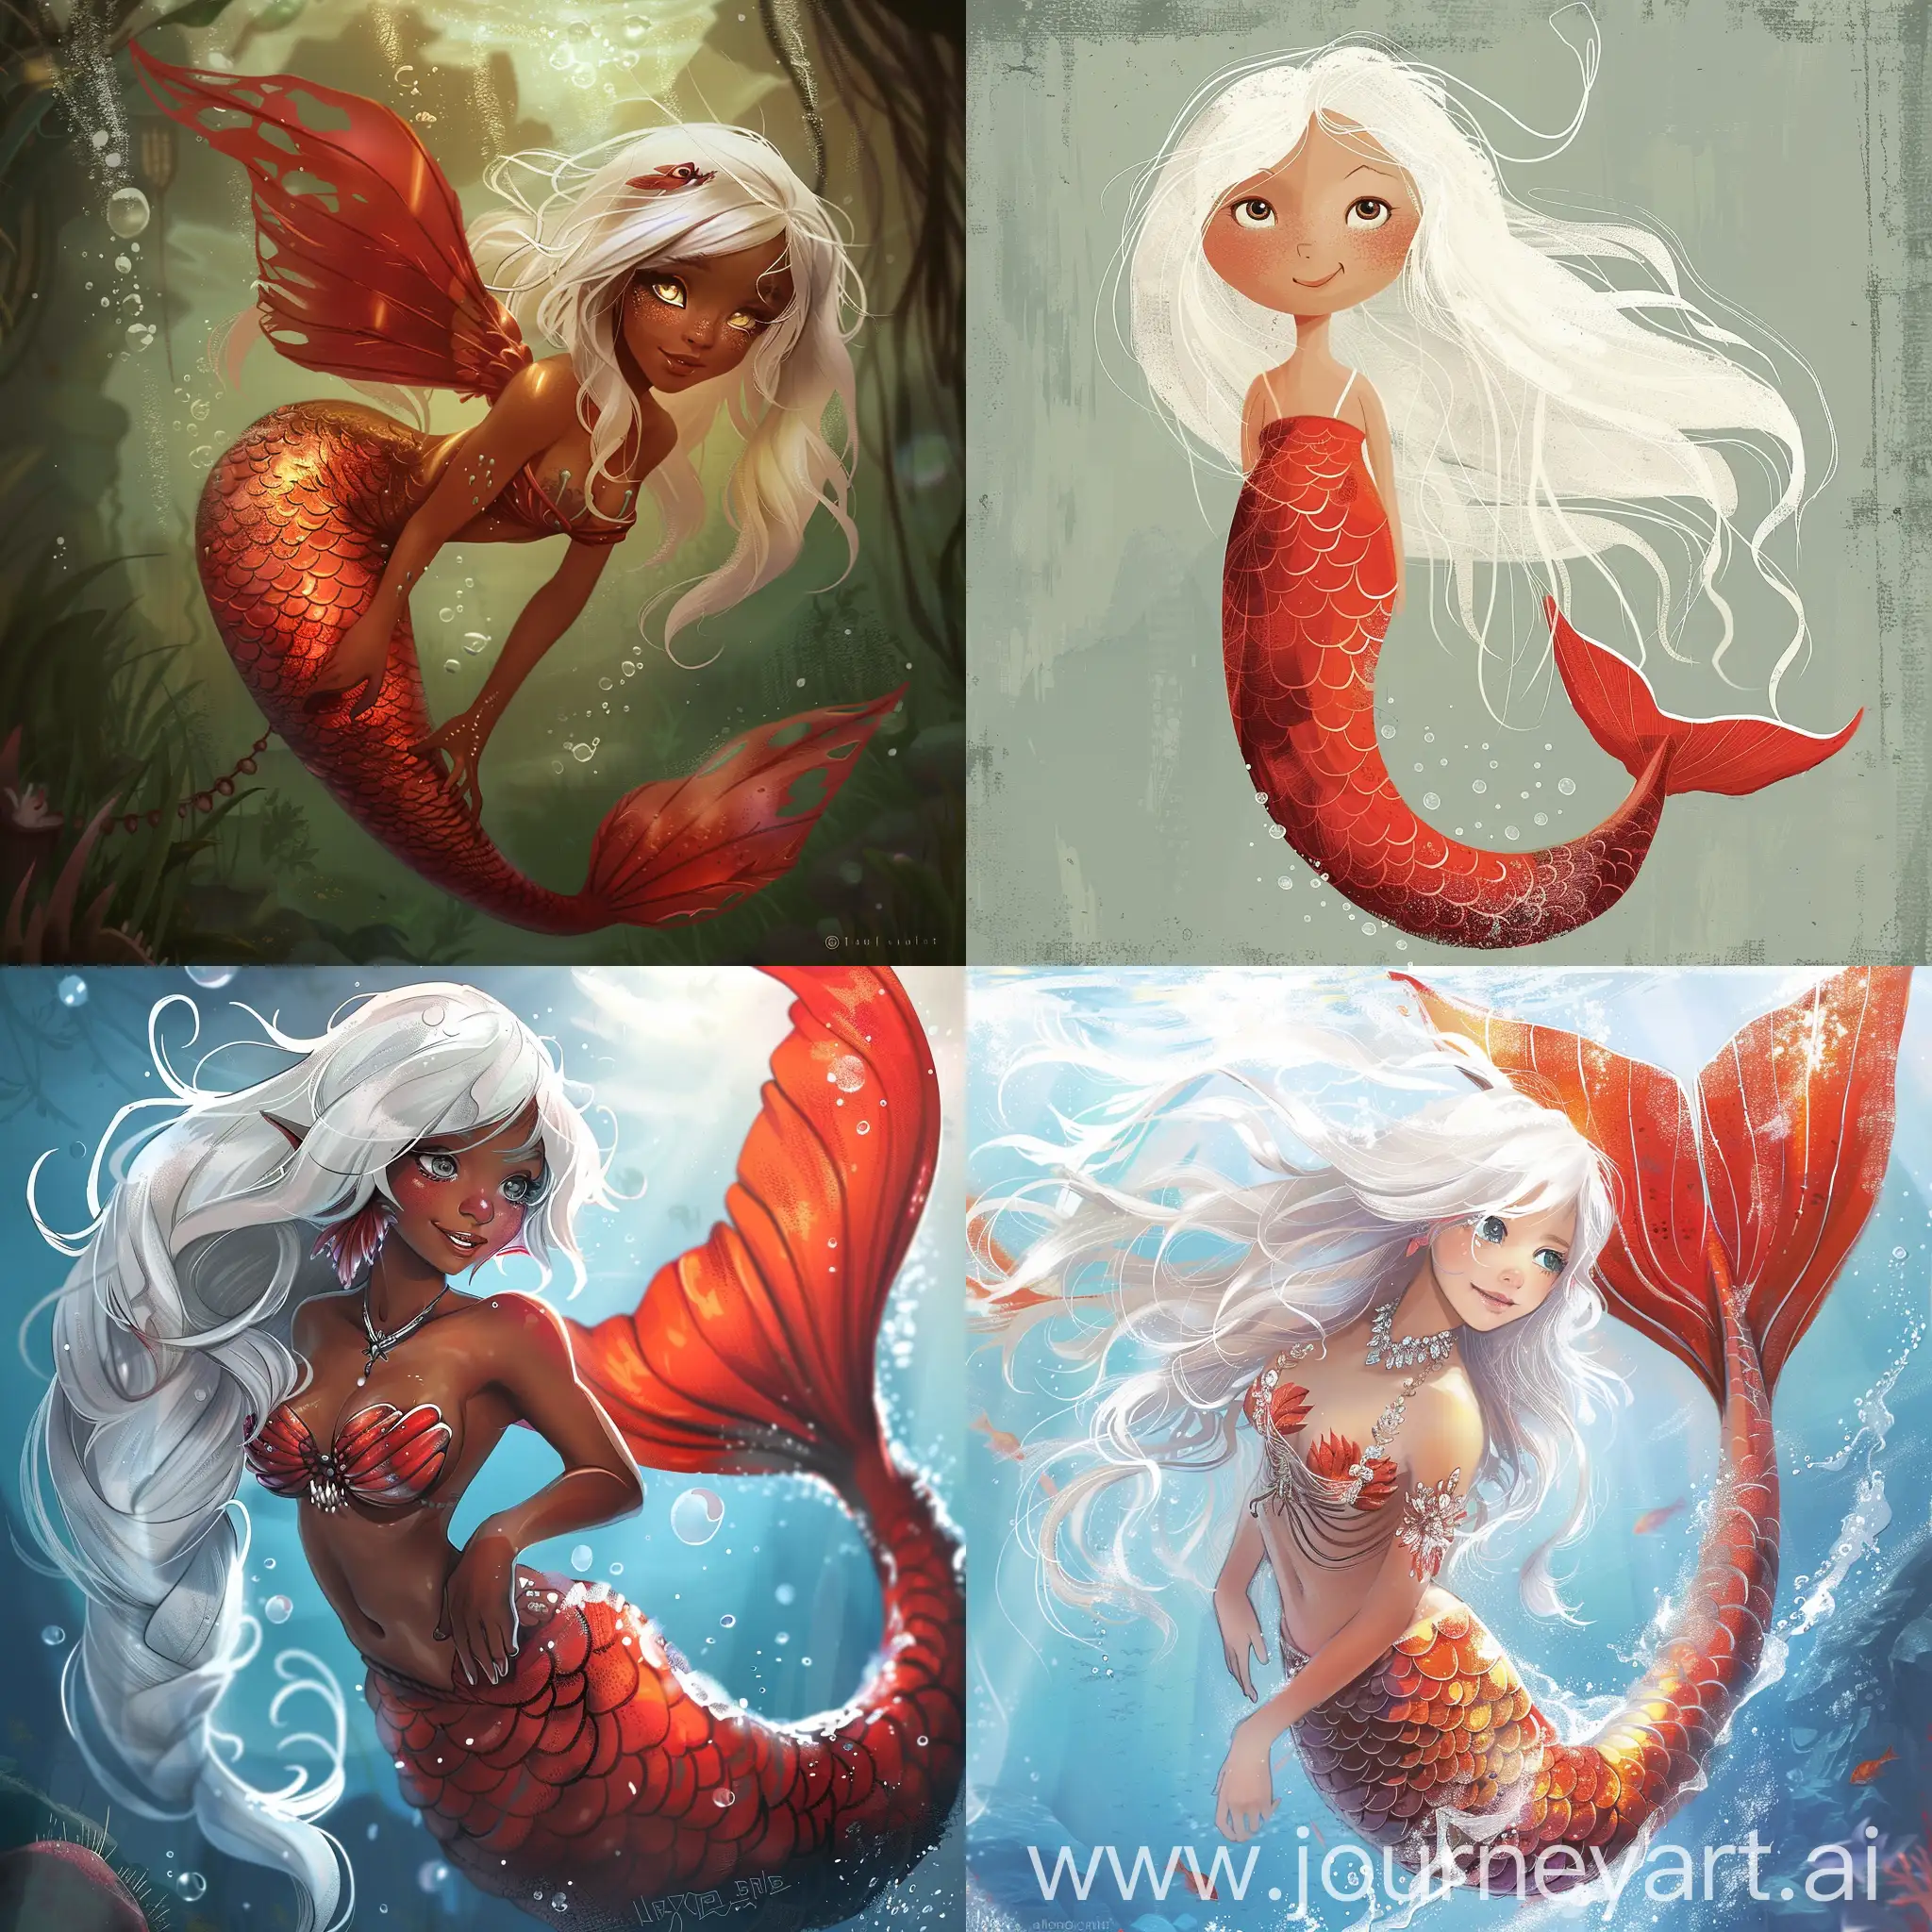 WhiteHaired-Mermaid-with-Vibrant-Red-Tail